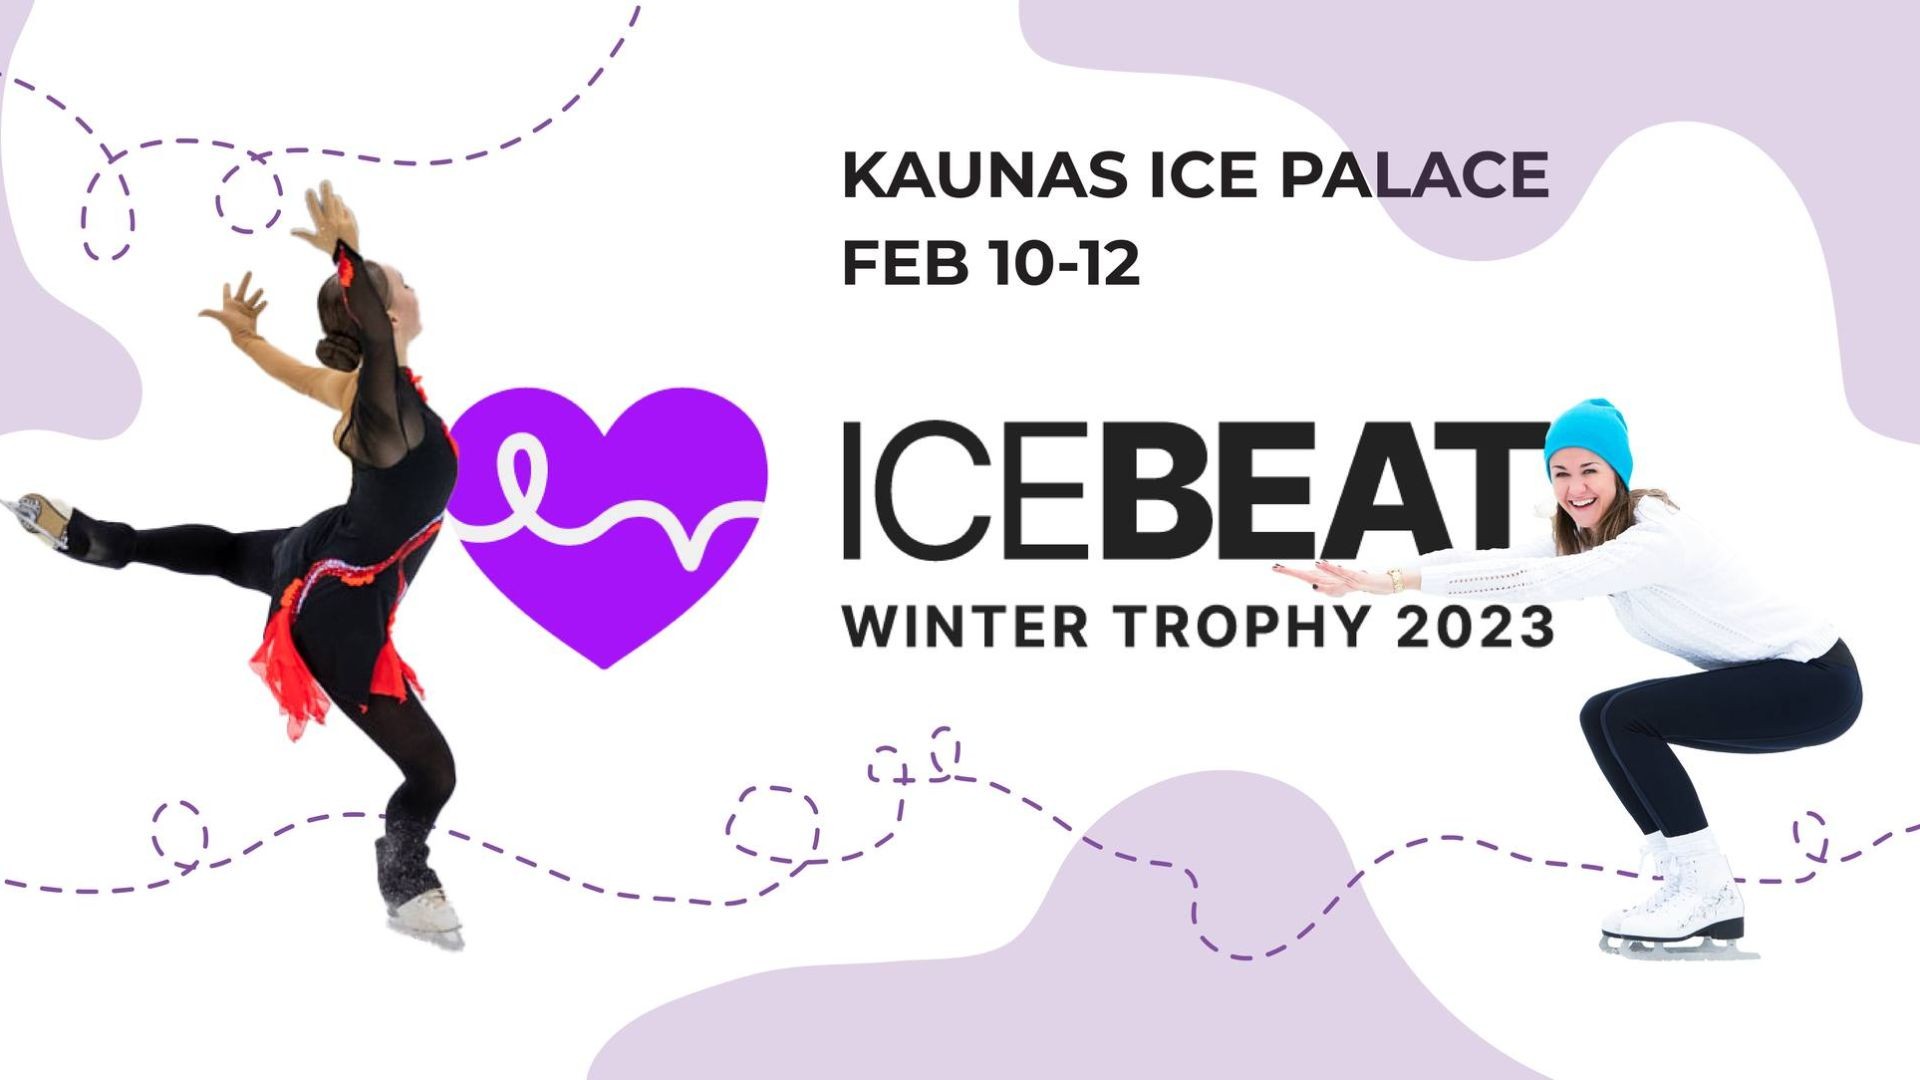 Day 3 | Icebeat Winter Trophy 2023